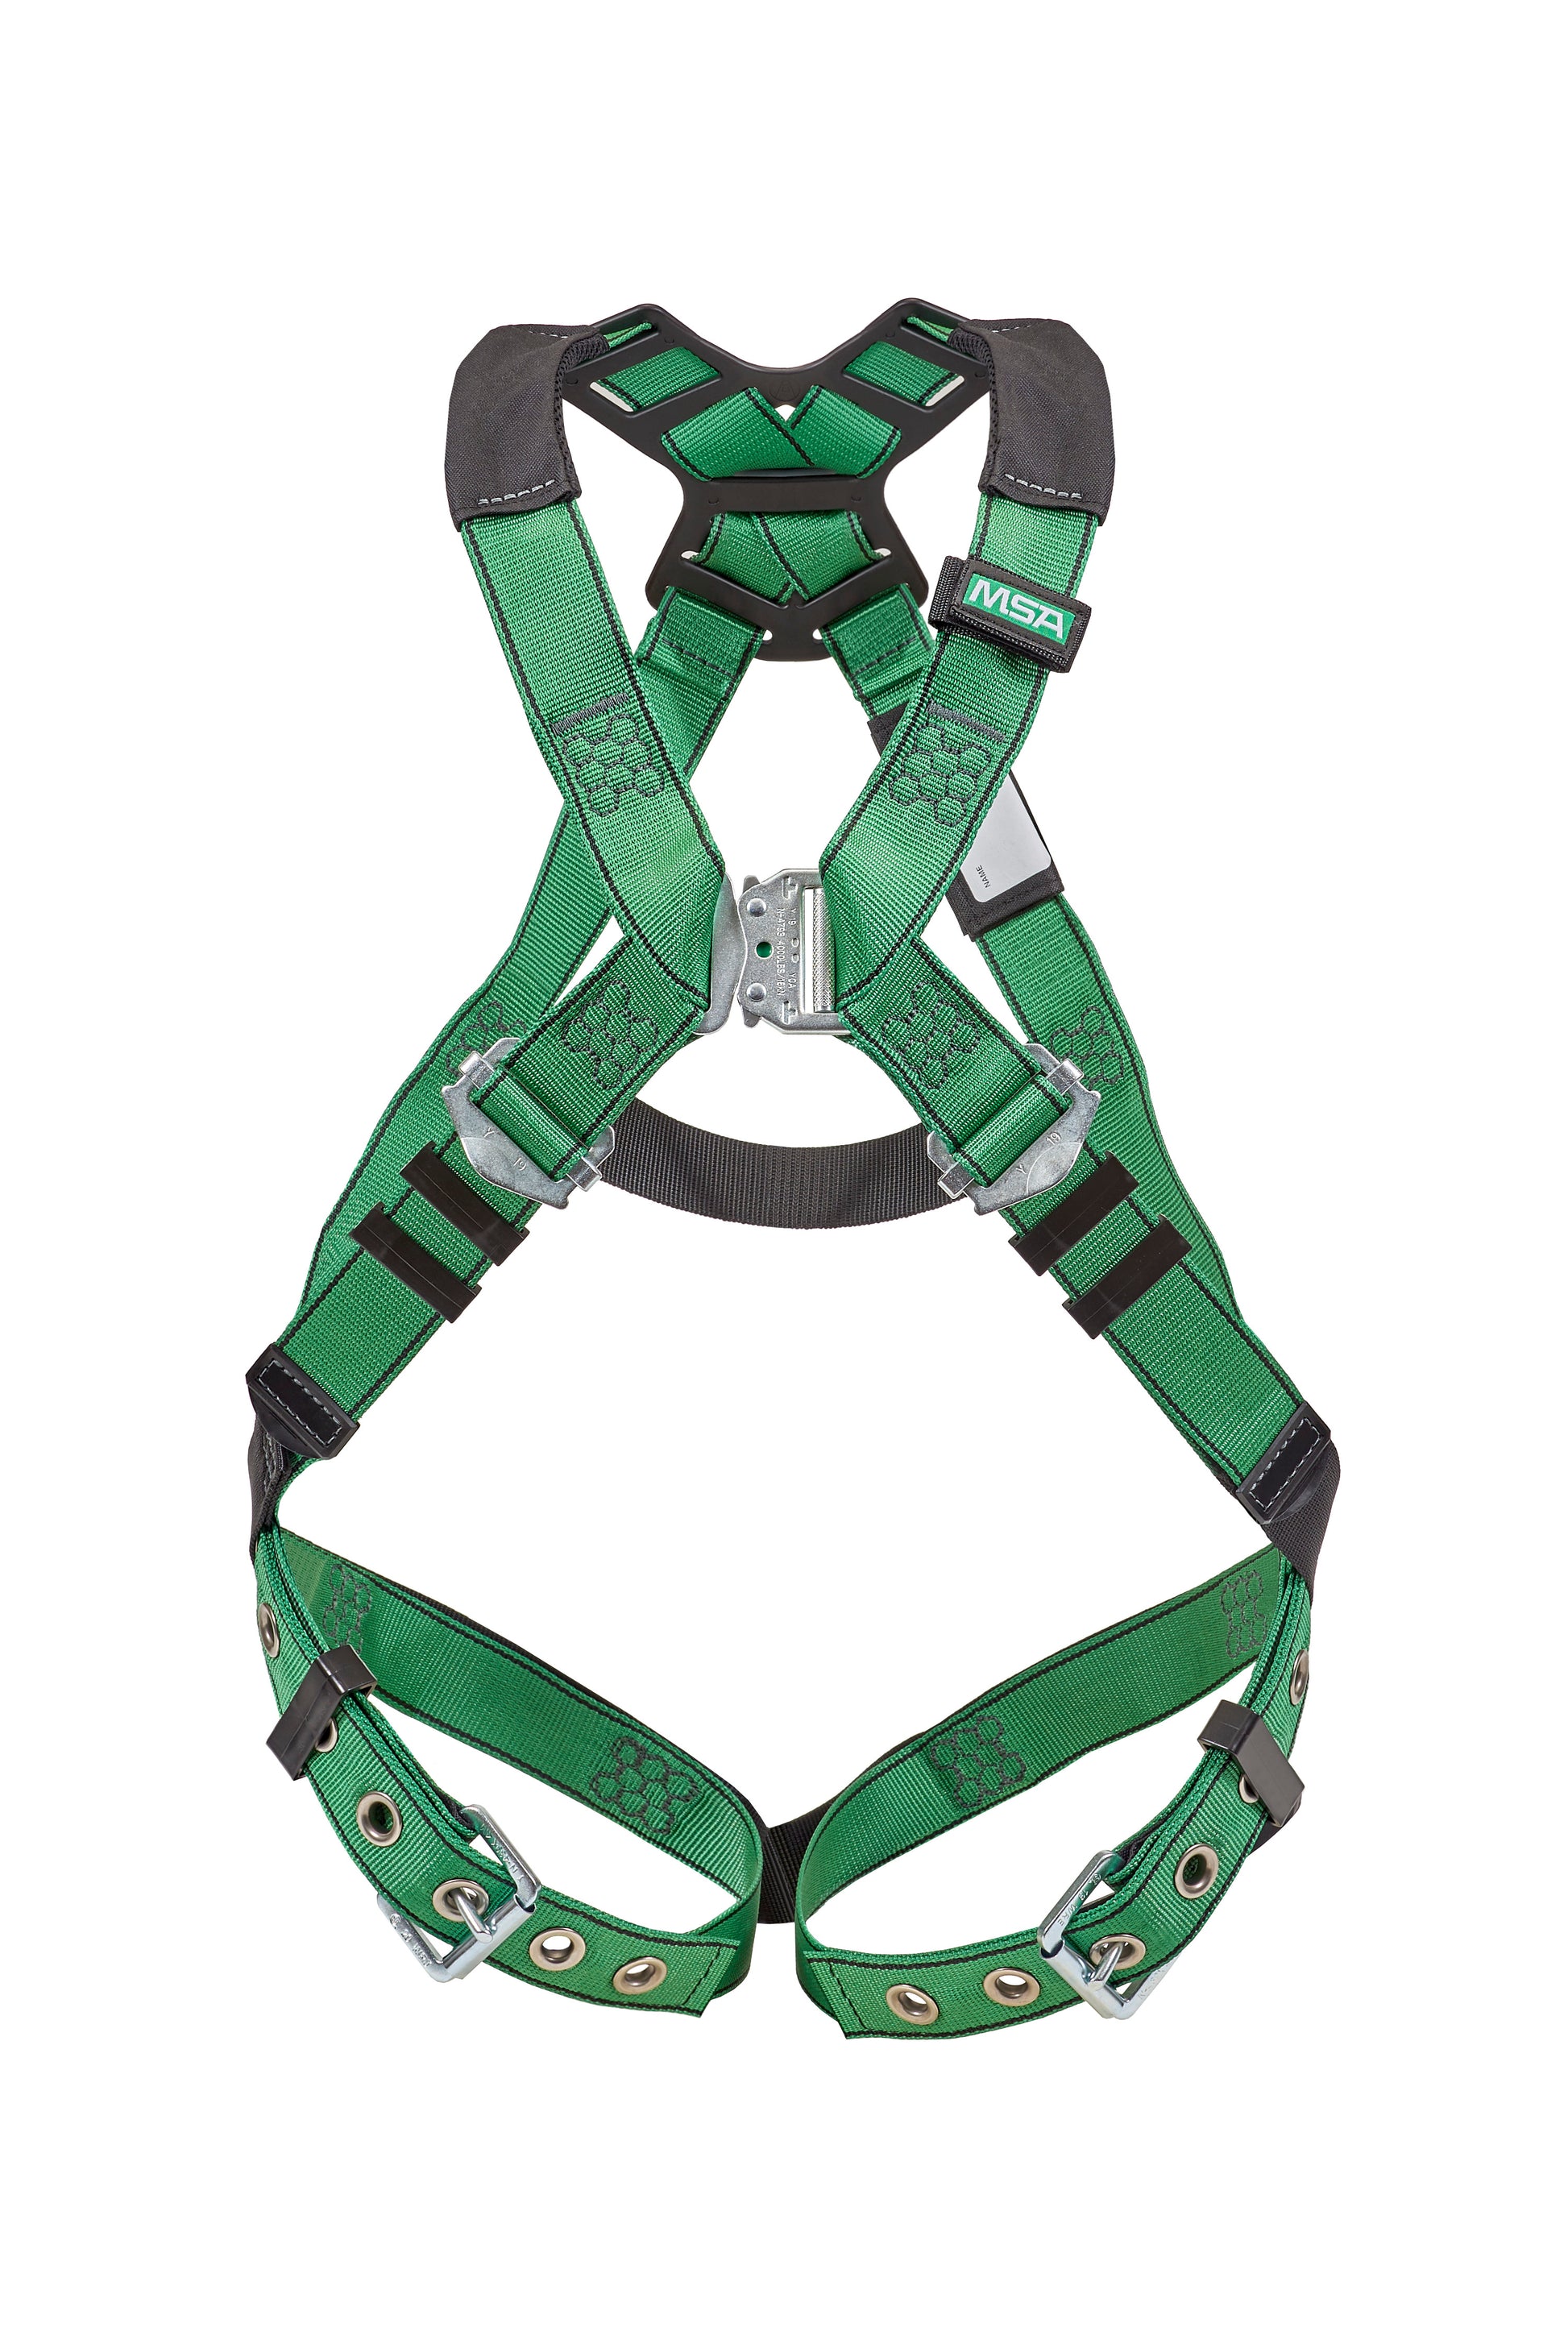 V-FORM Harness, Super Extra Large, Back D-Ring, Tongue Buckle Leg Straps, Quick Connect Chest Buckle